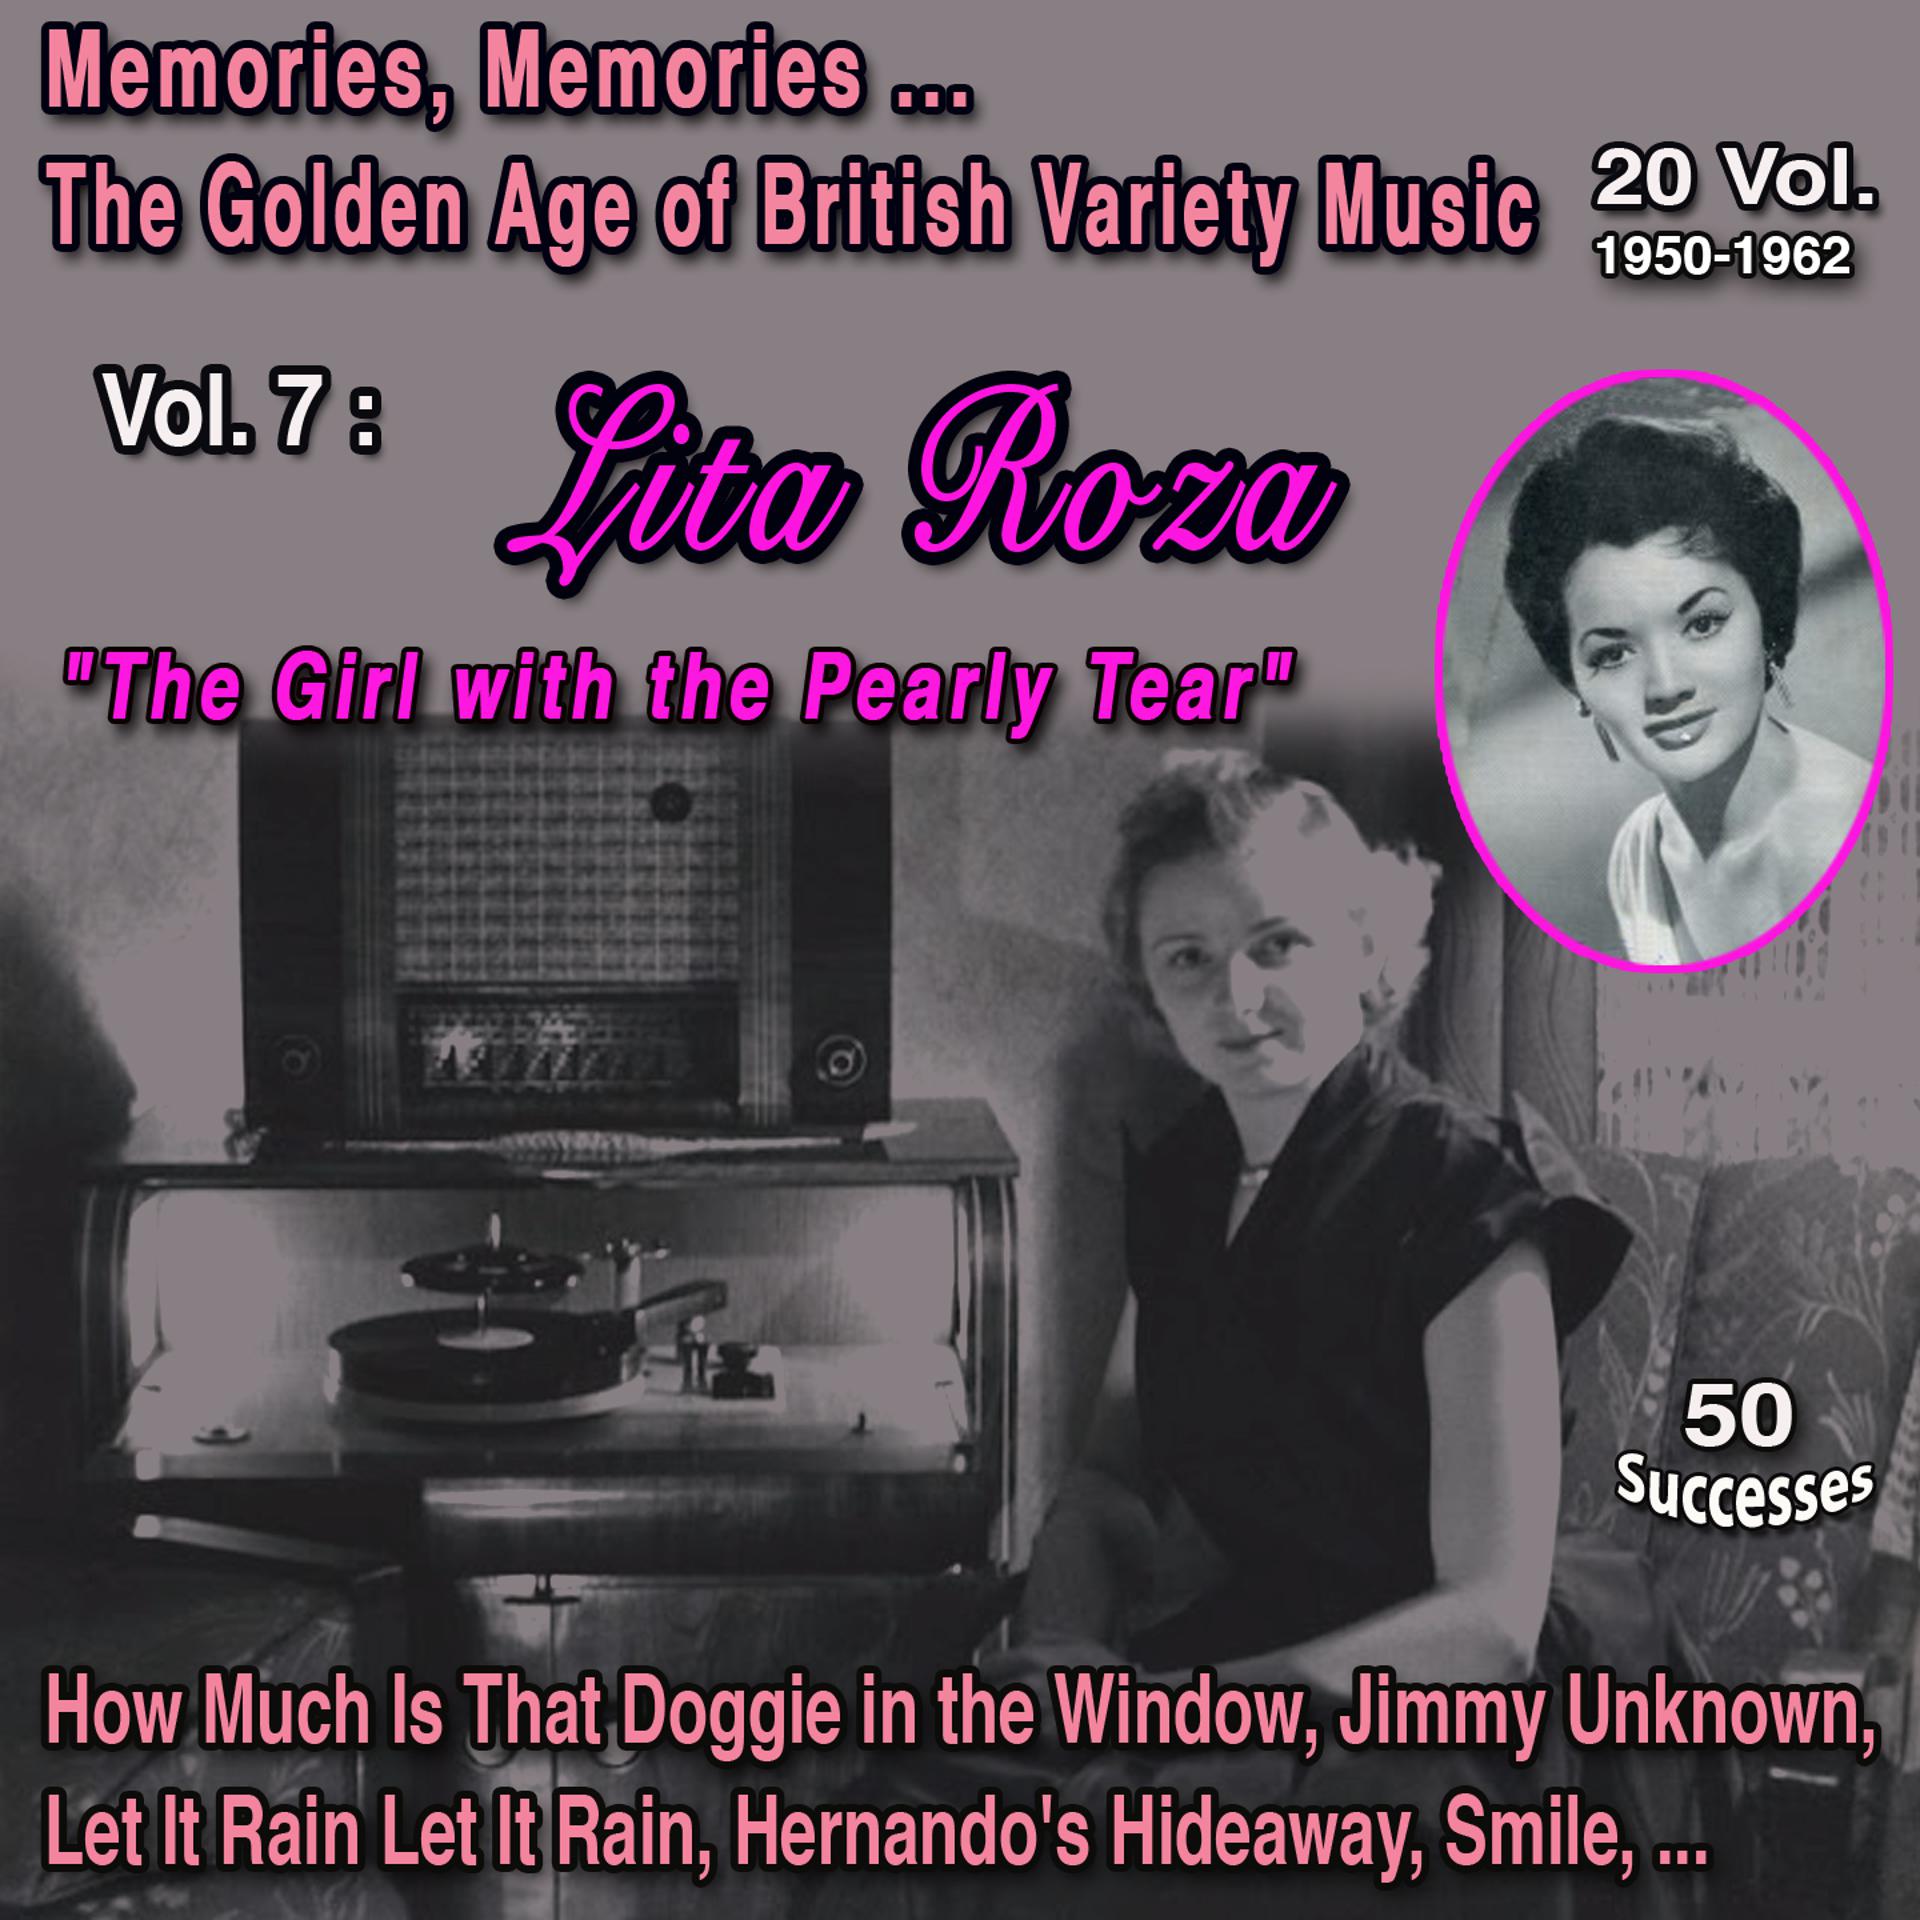 Постер альбома Memories Memories... The Golden Age of British Variety Music 20 Vol. 1950-1962 Vol. 7 : Lita Roza "The Girl with the Pearly Tear"